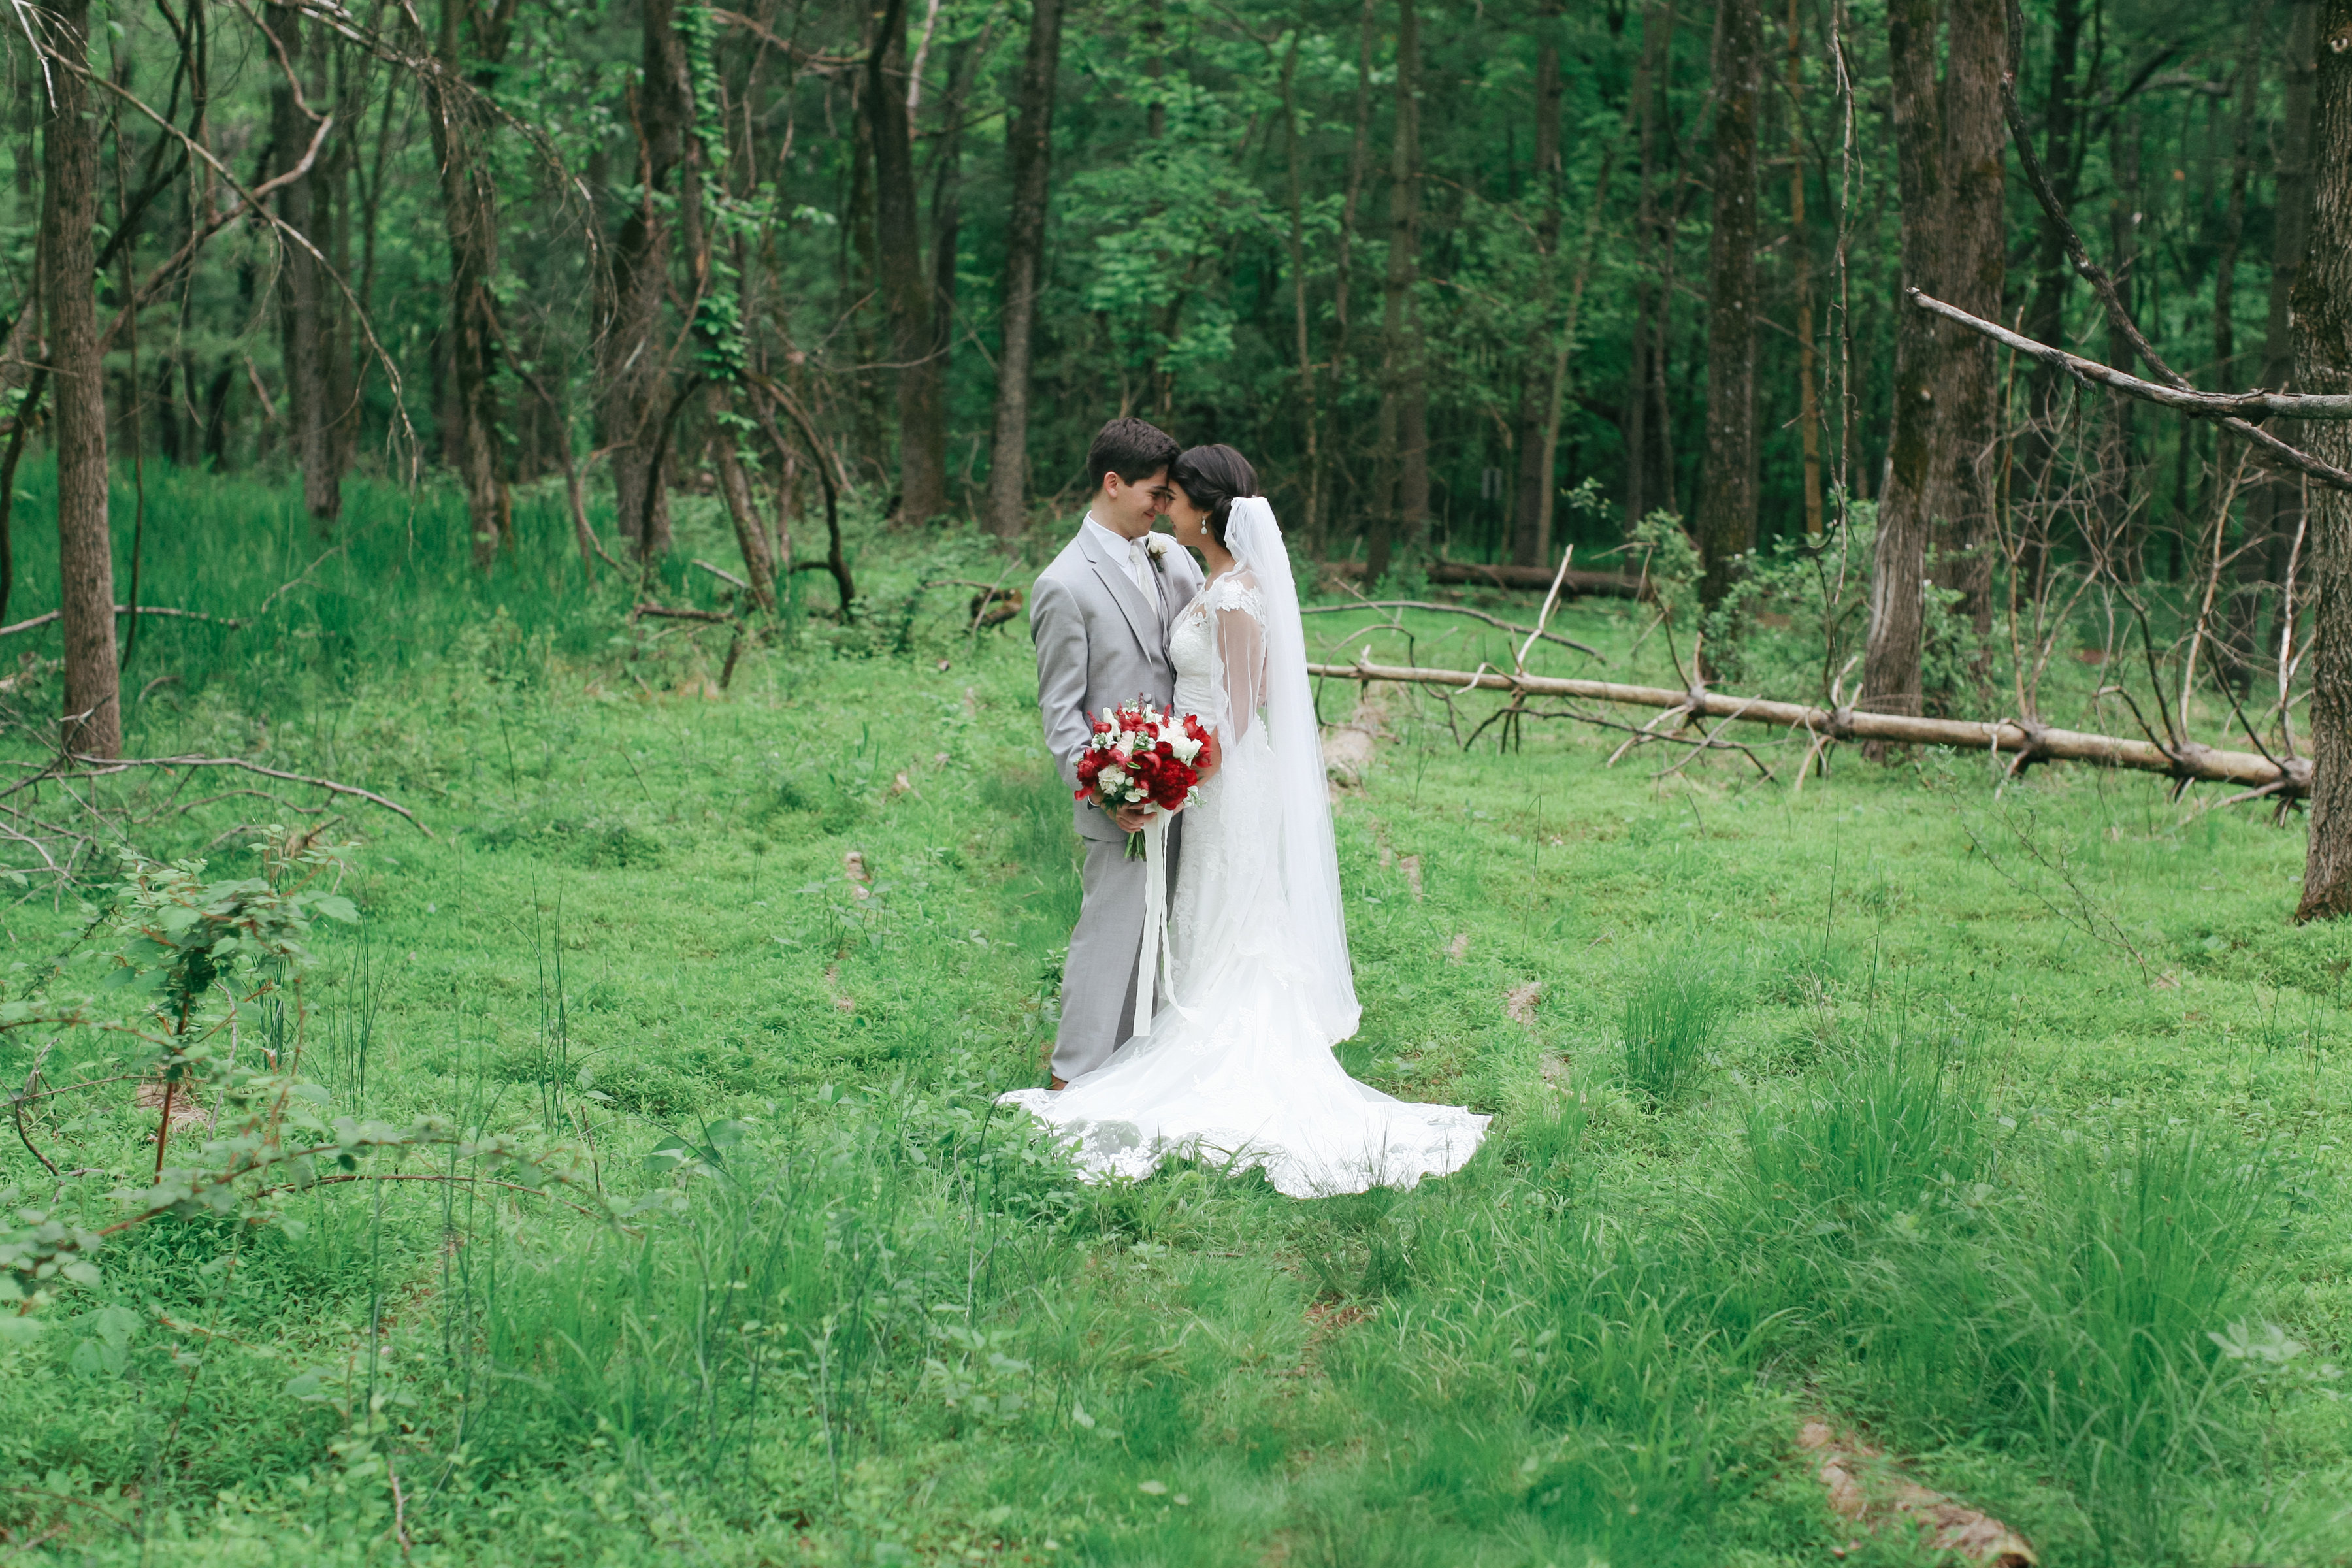 Hannah & Daniel: Manor Wedding, couple standing out in the grass among trees